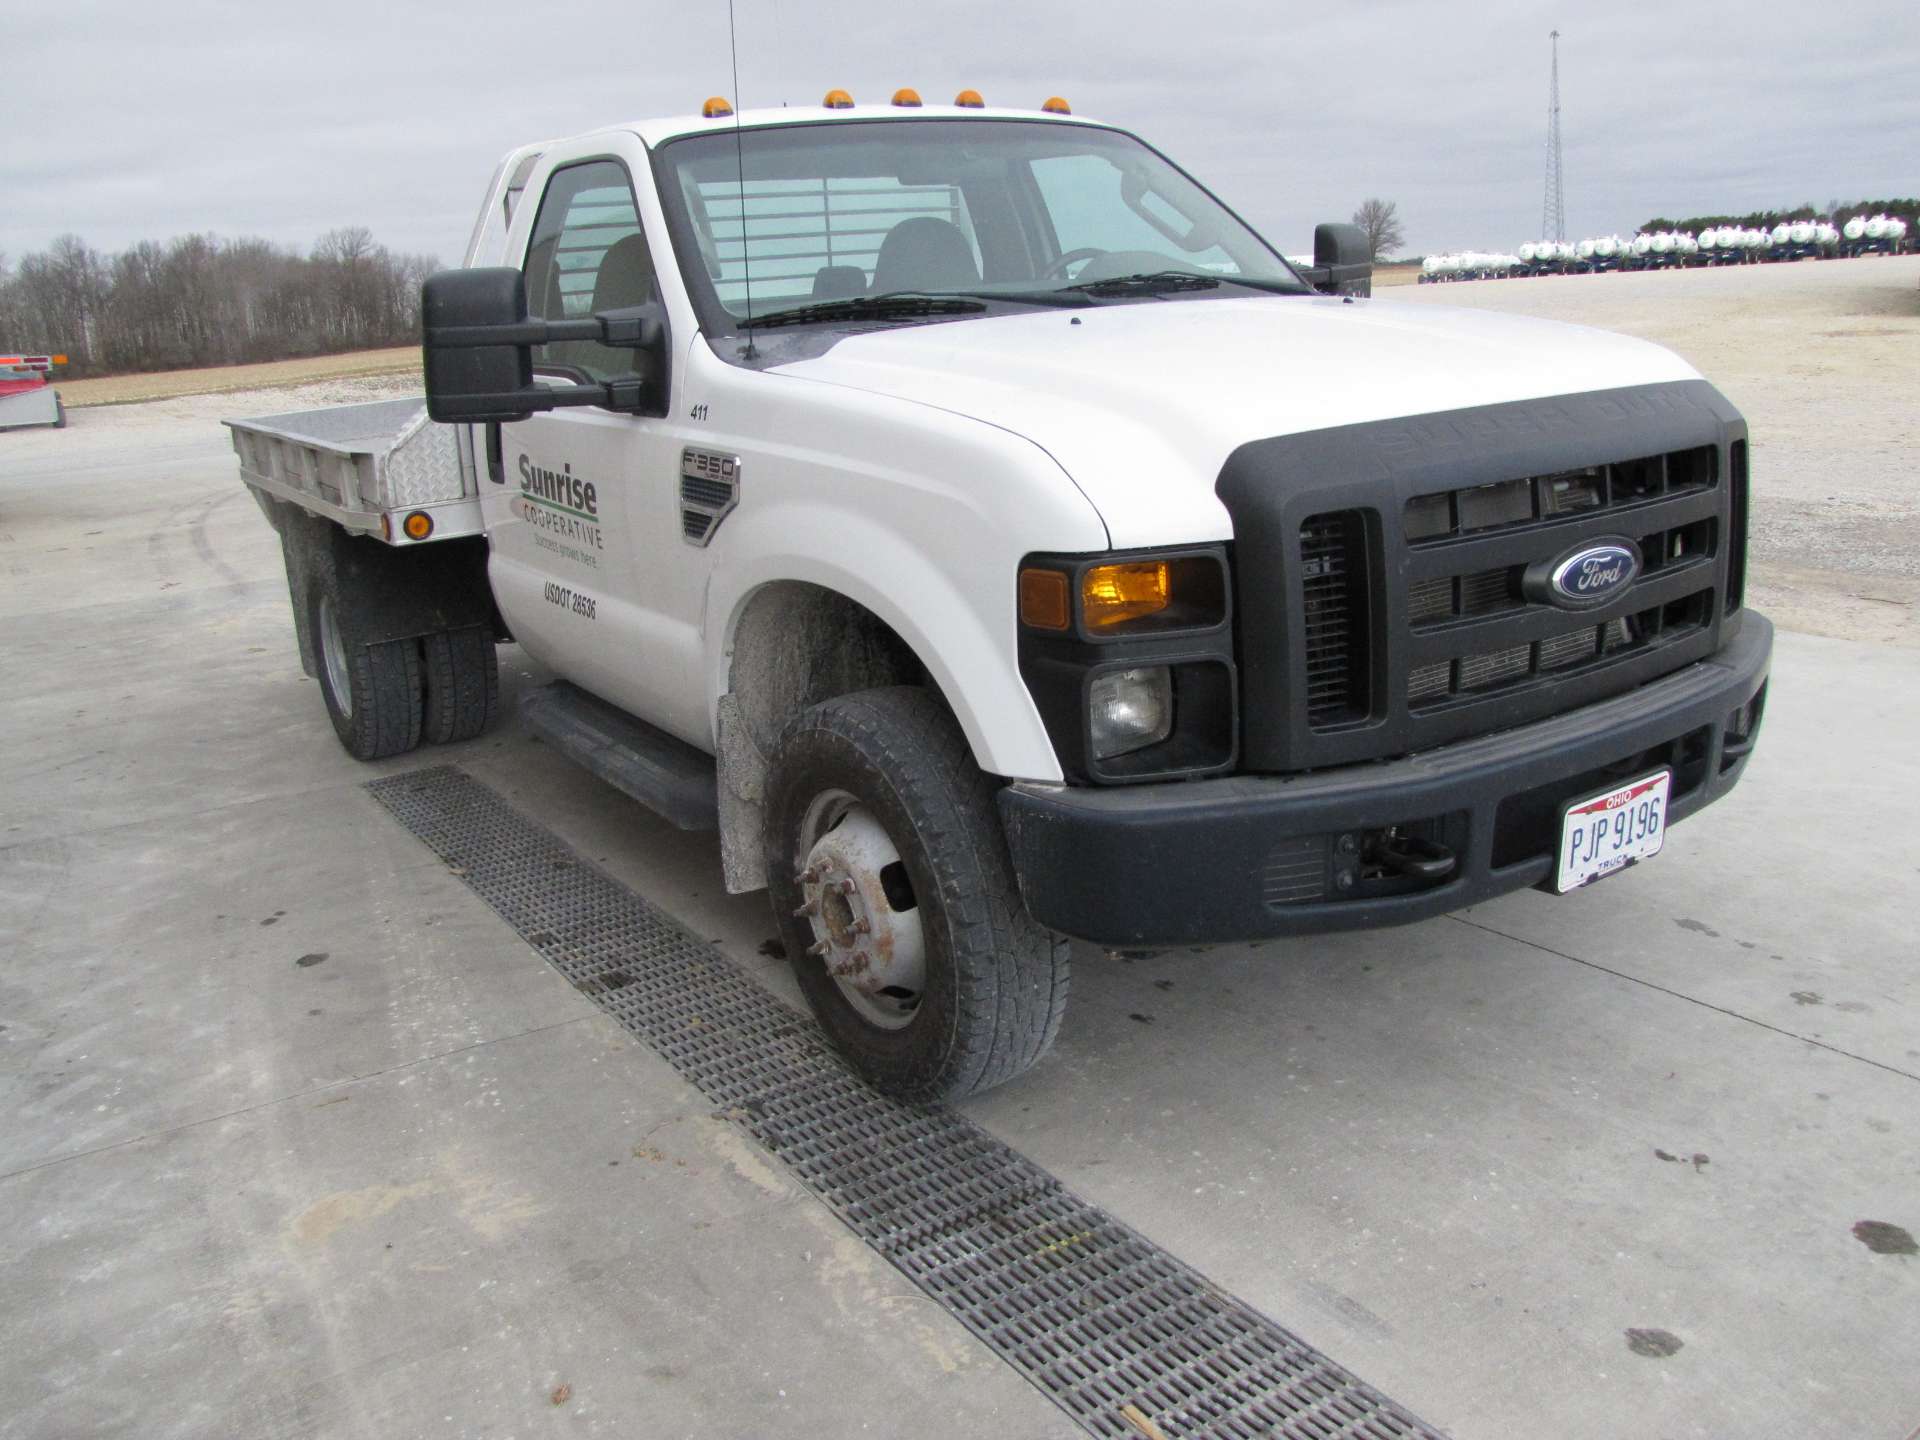 2009 Ford F350 XL Super Duty pickup truck - Image 12 of 55